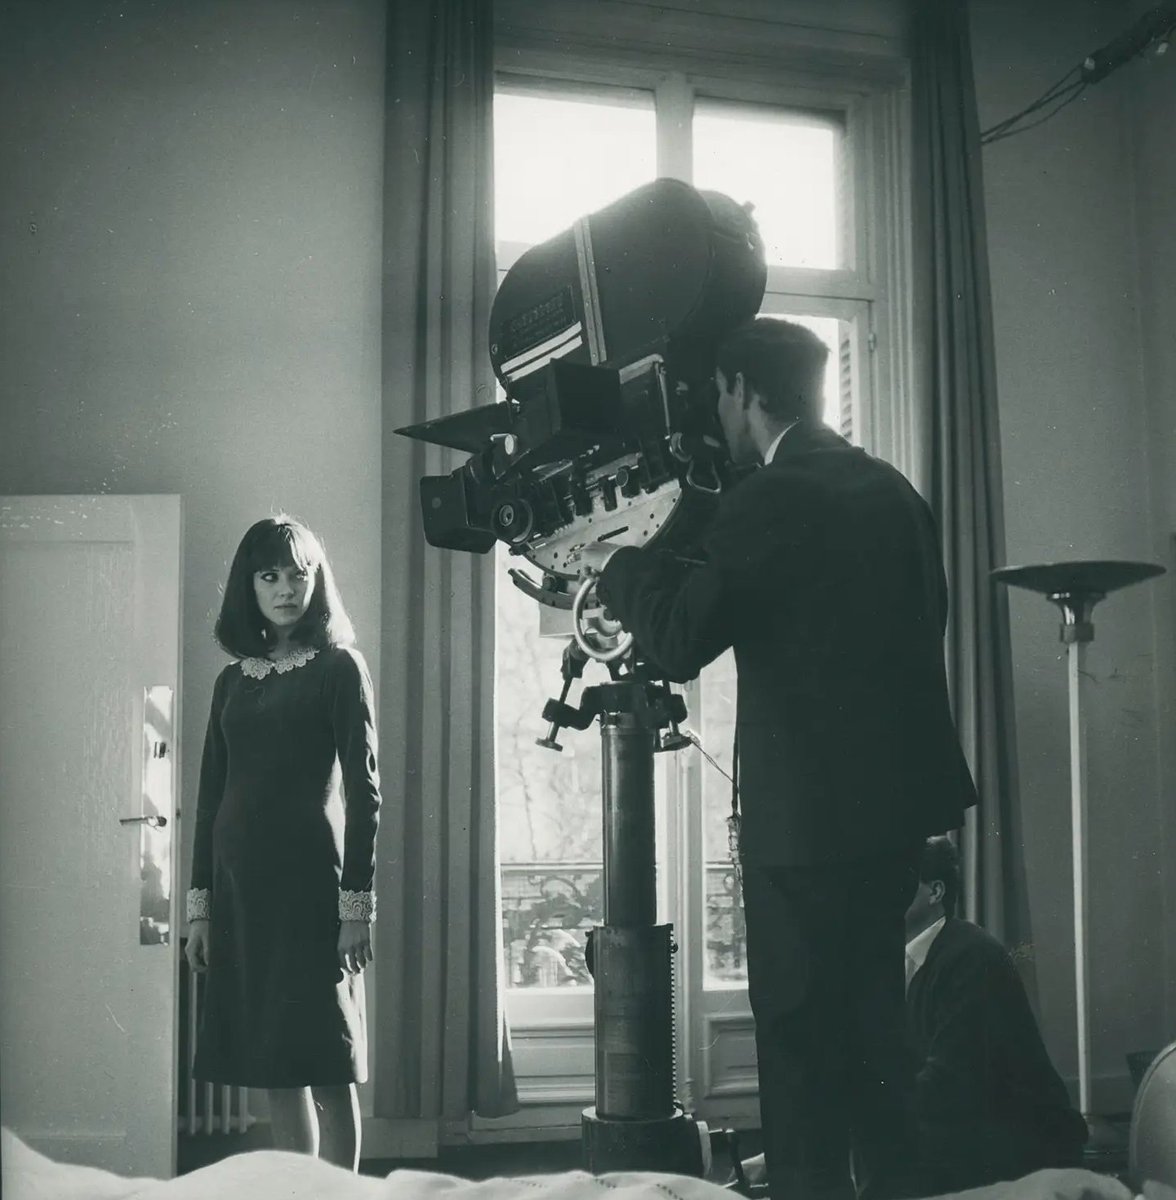 DP Raoul Coutard lining up a shot of Anna Karina while Godard looks on during the making of ALPHAVILLE (1965).